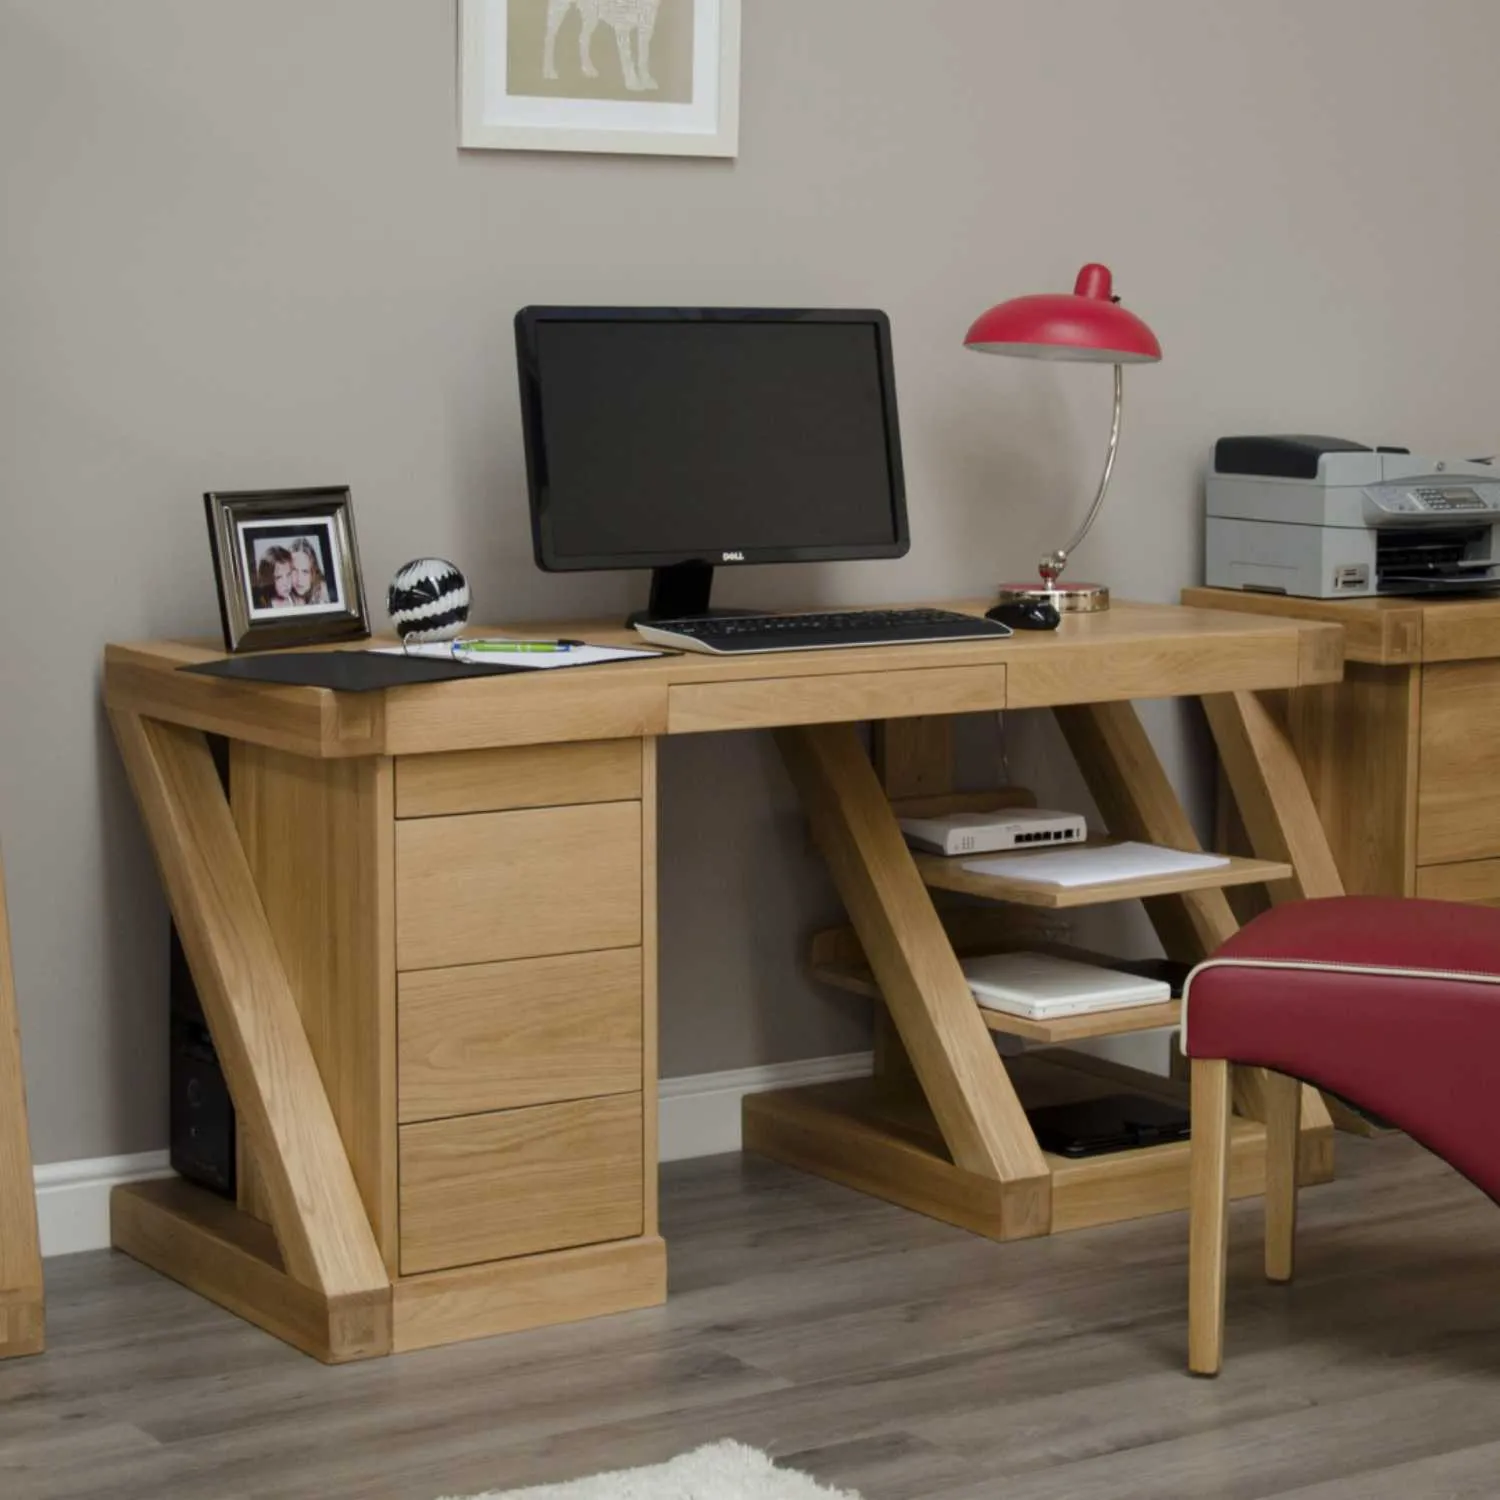 Z Shape Large Oak Computer Desk With Drawers Keyboard Tray and Shelves